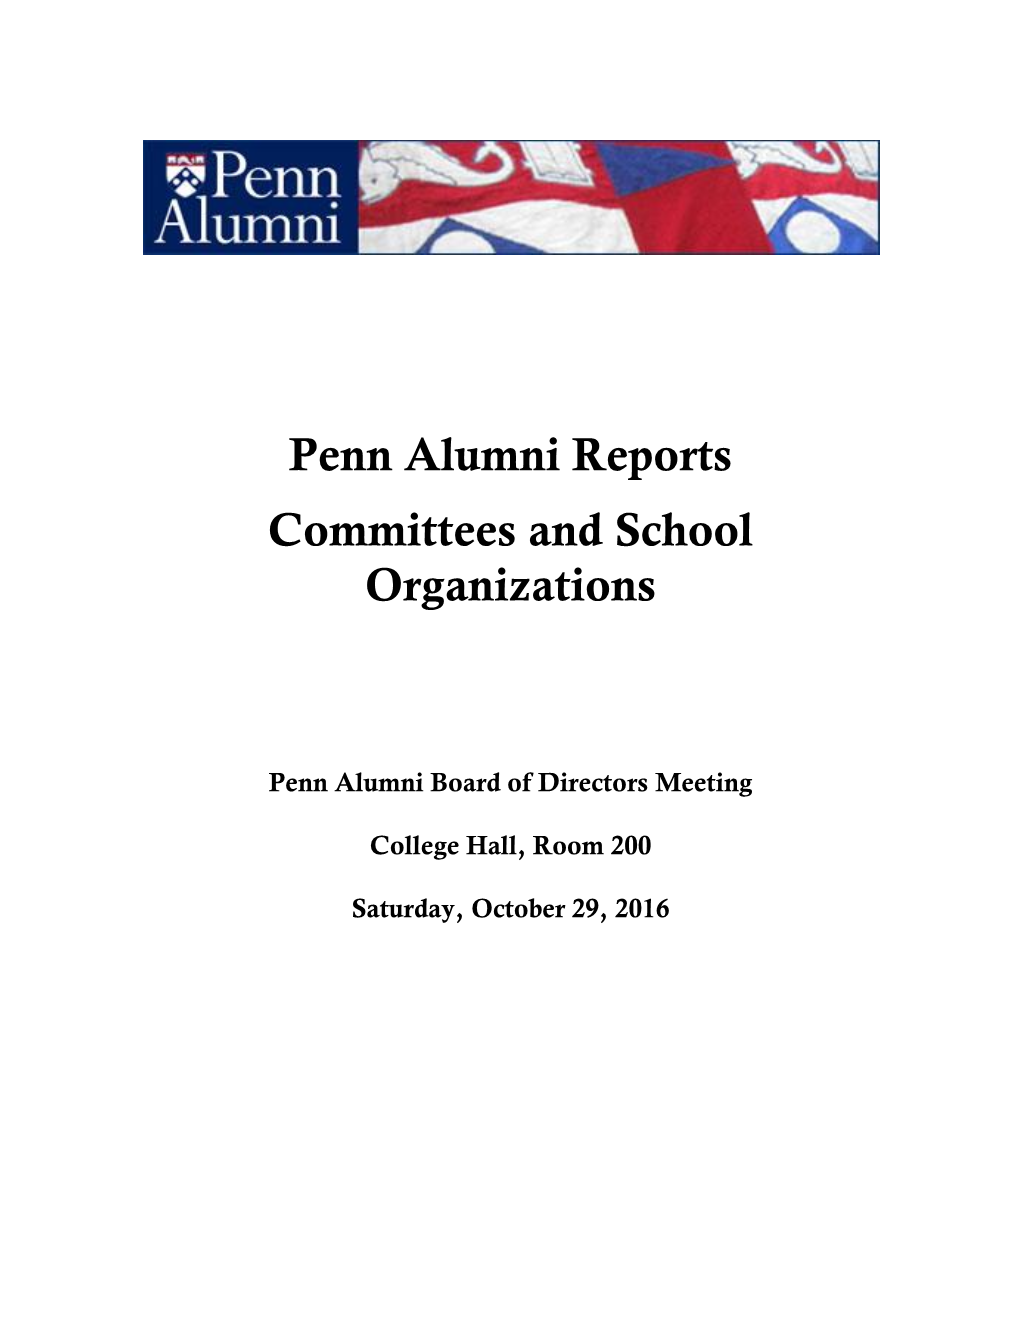 Alumni Council on Admissions